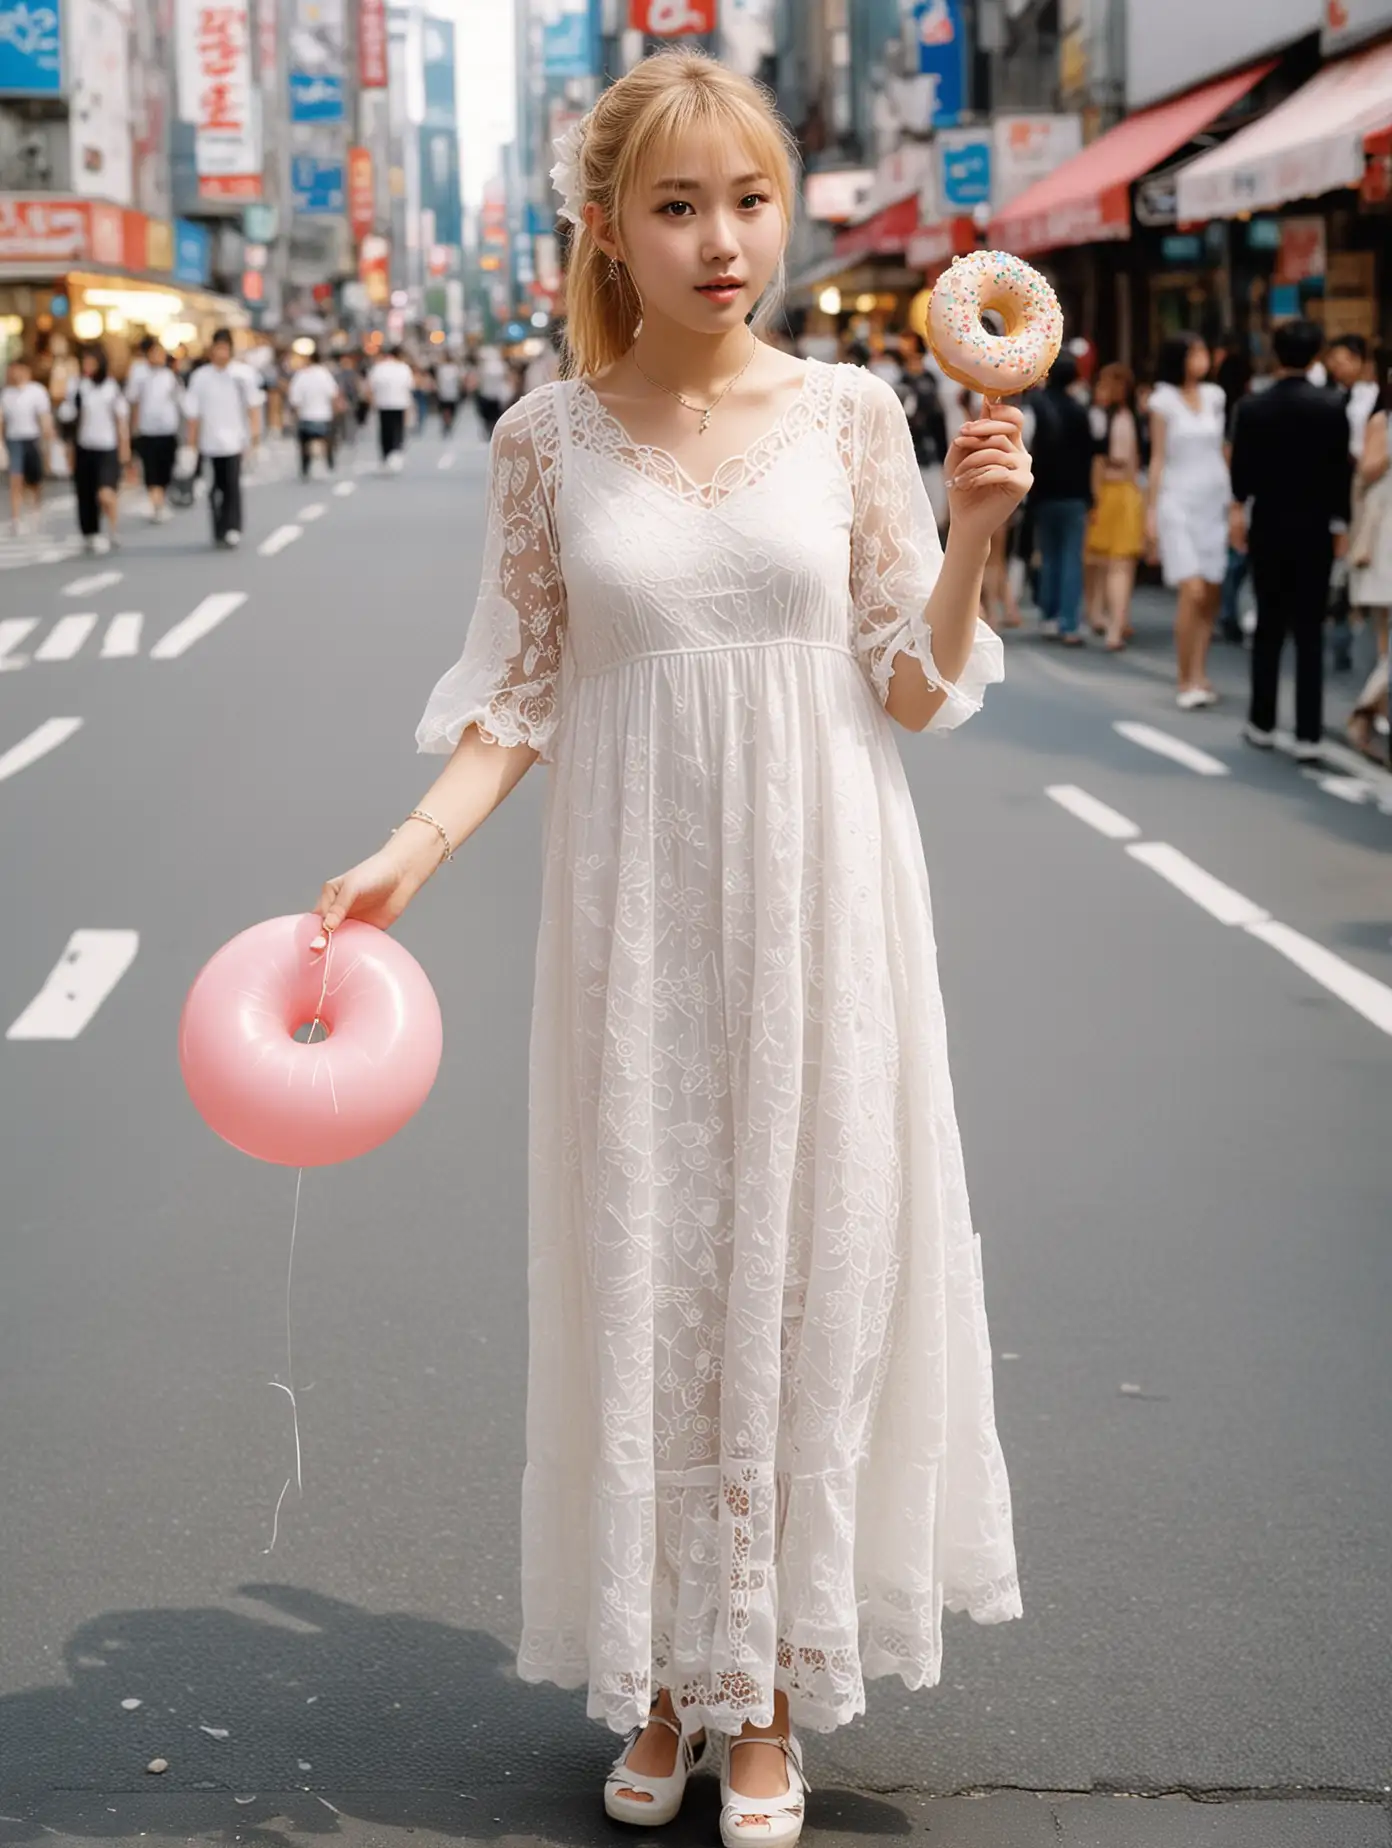 real photos of Japanese teenager showing street fashions in Shinjuku circa year 2000,  single female wearing white lace maxi-dress with fine pattern, in her left hand she holds up a donut, in her right hand she holds a balloon on a string, kawaii style, in the style of Shoichi Aoki photos for “Fruits” magazine